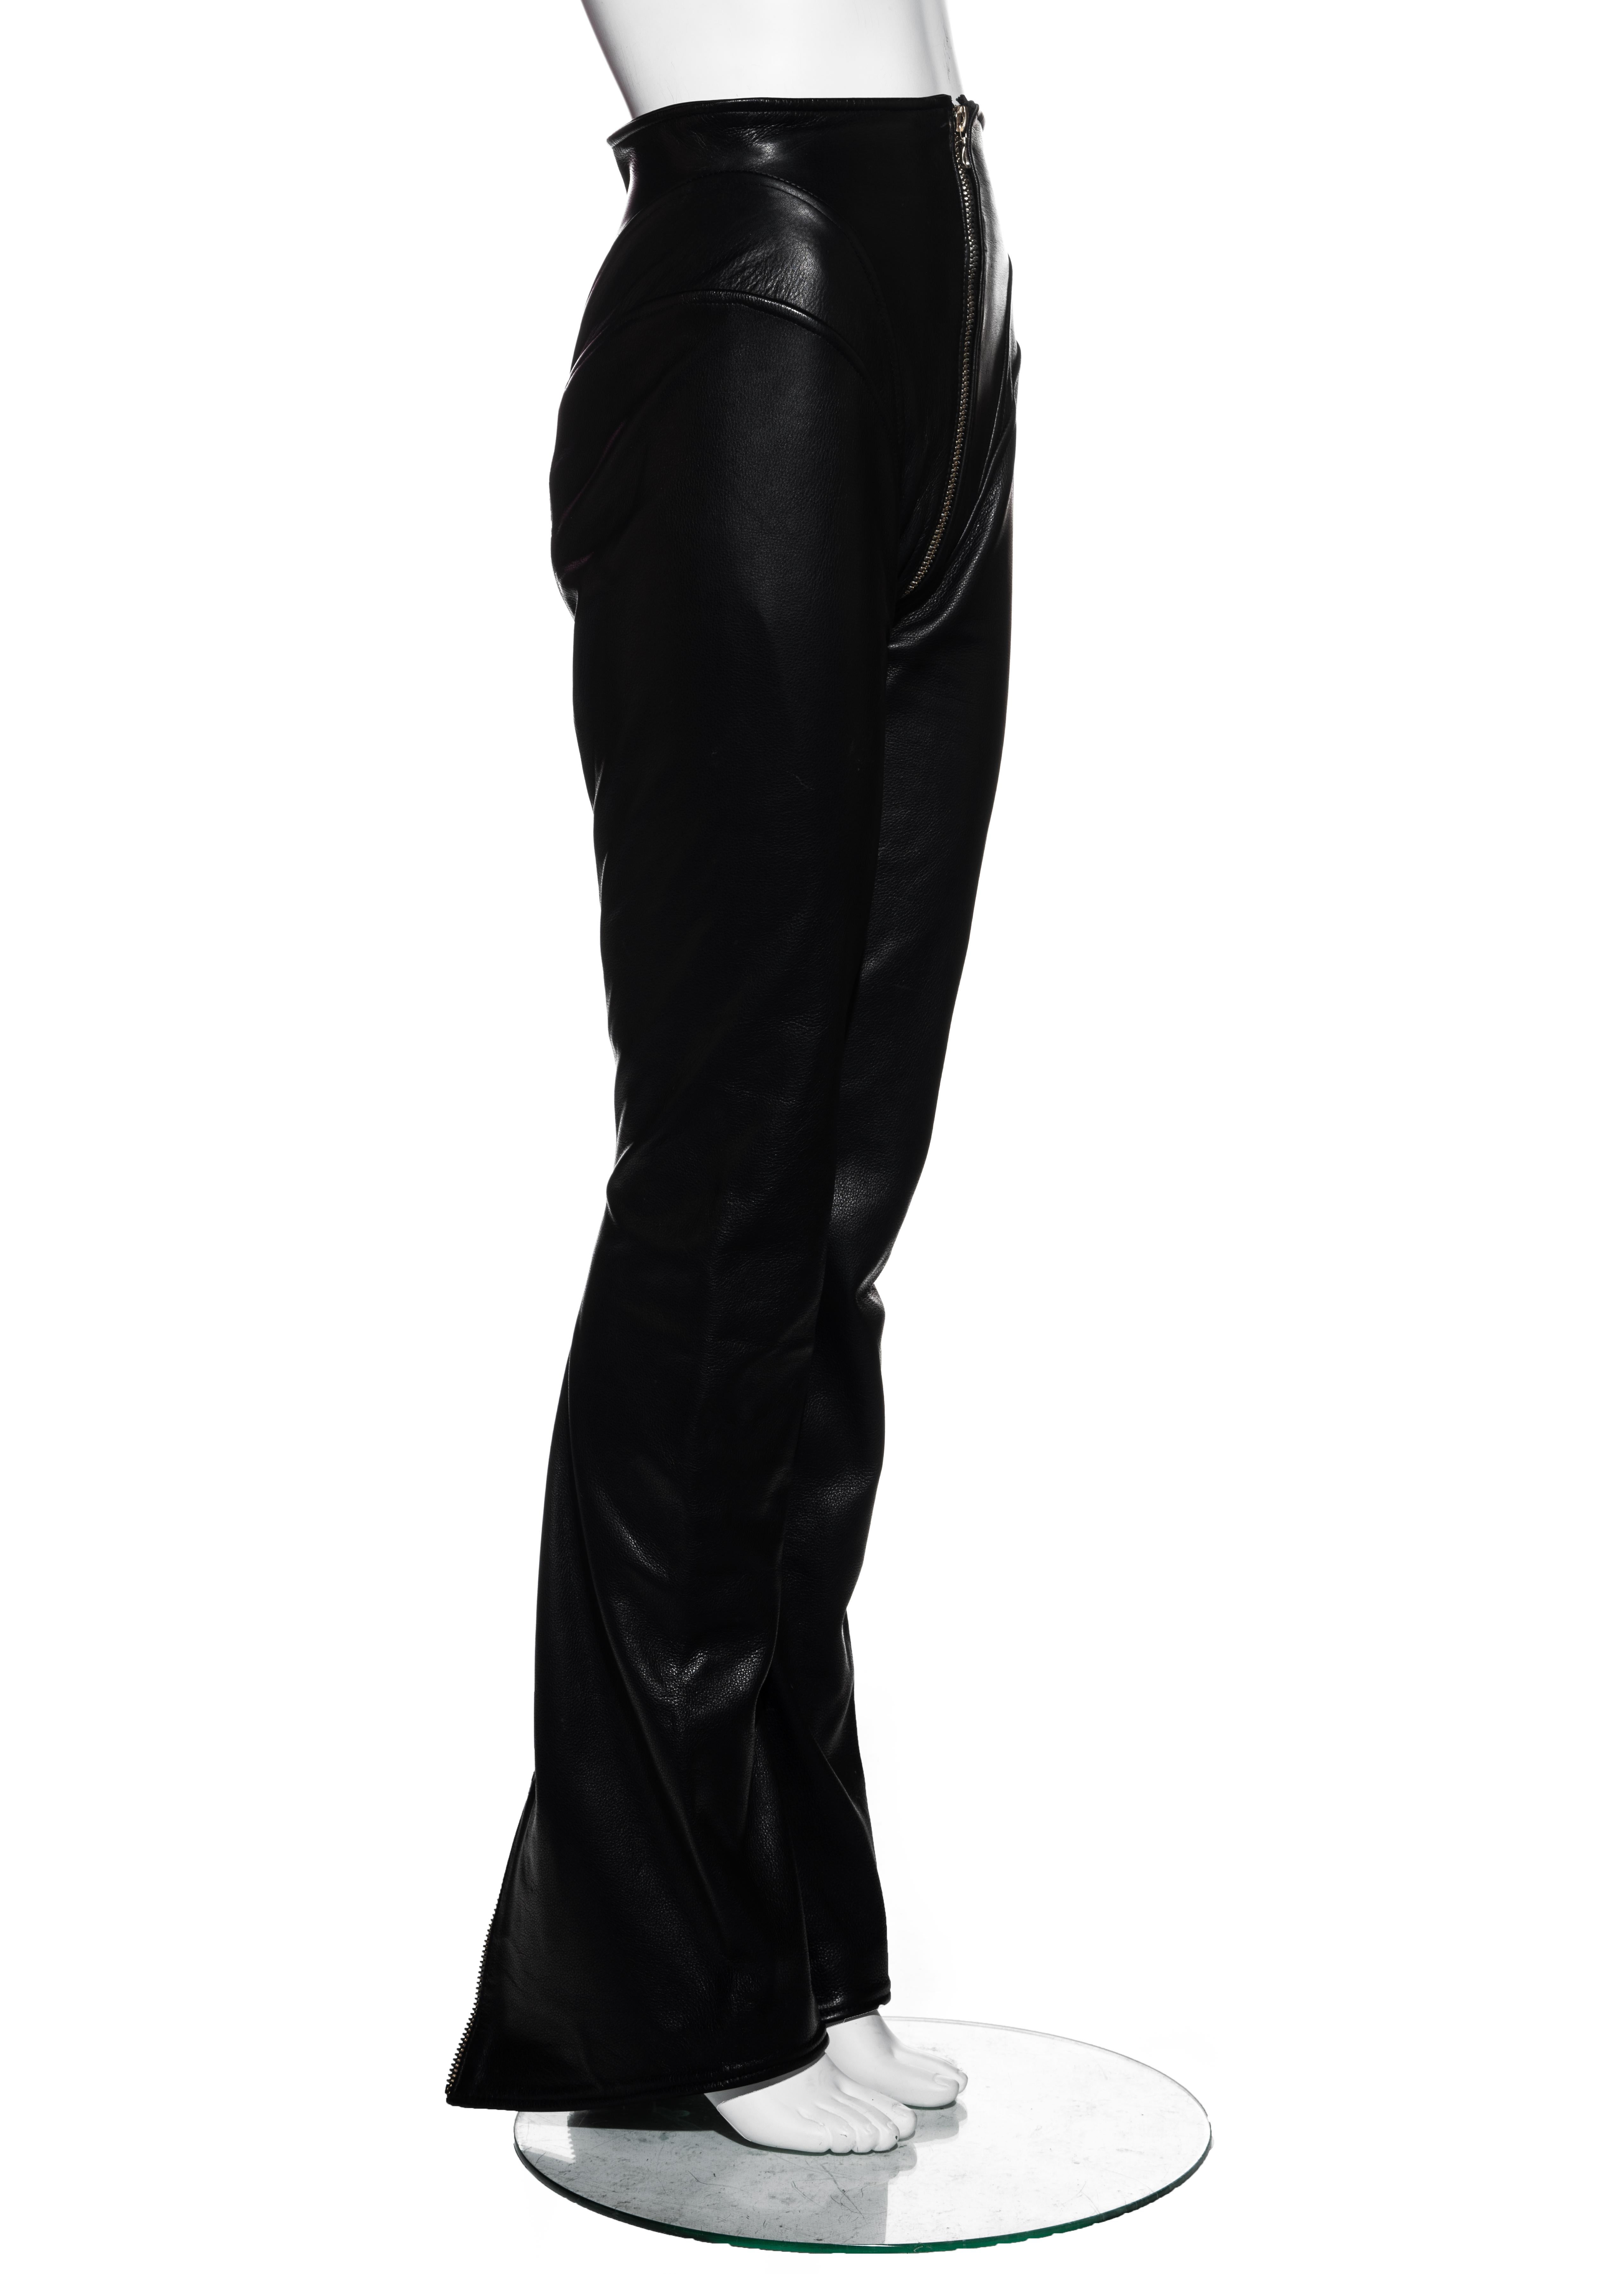 Vivienne Westwood black leather corseted pants with crotch zipper, fw 1997 In Excellent Condition For Sale In London, GB